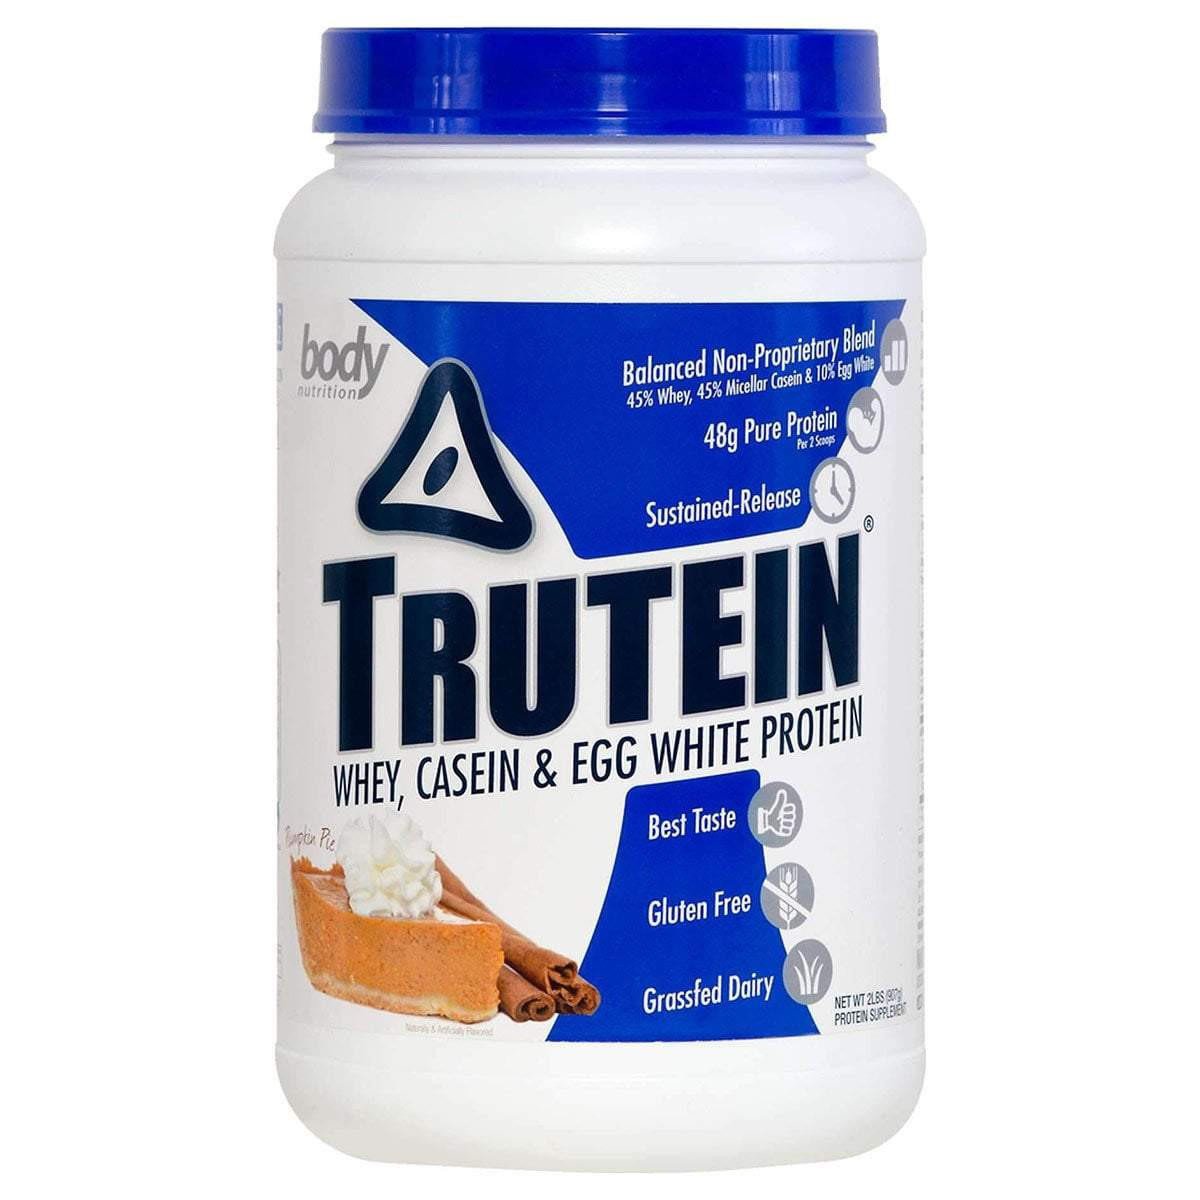 Image of Body Nutrition Trutein 2 Lbs